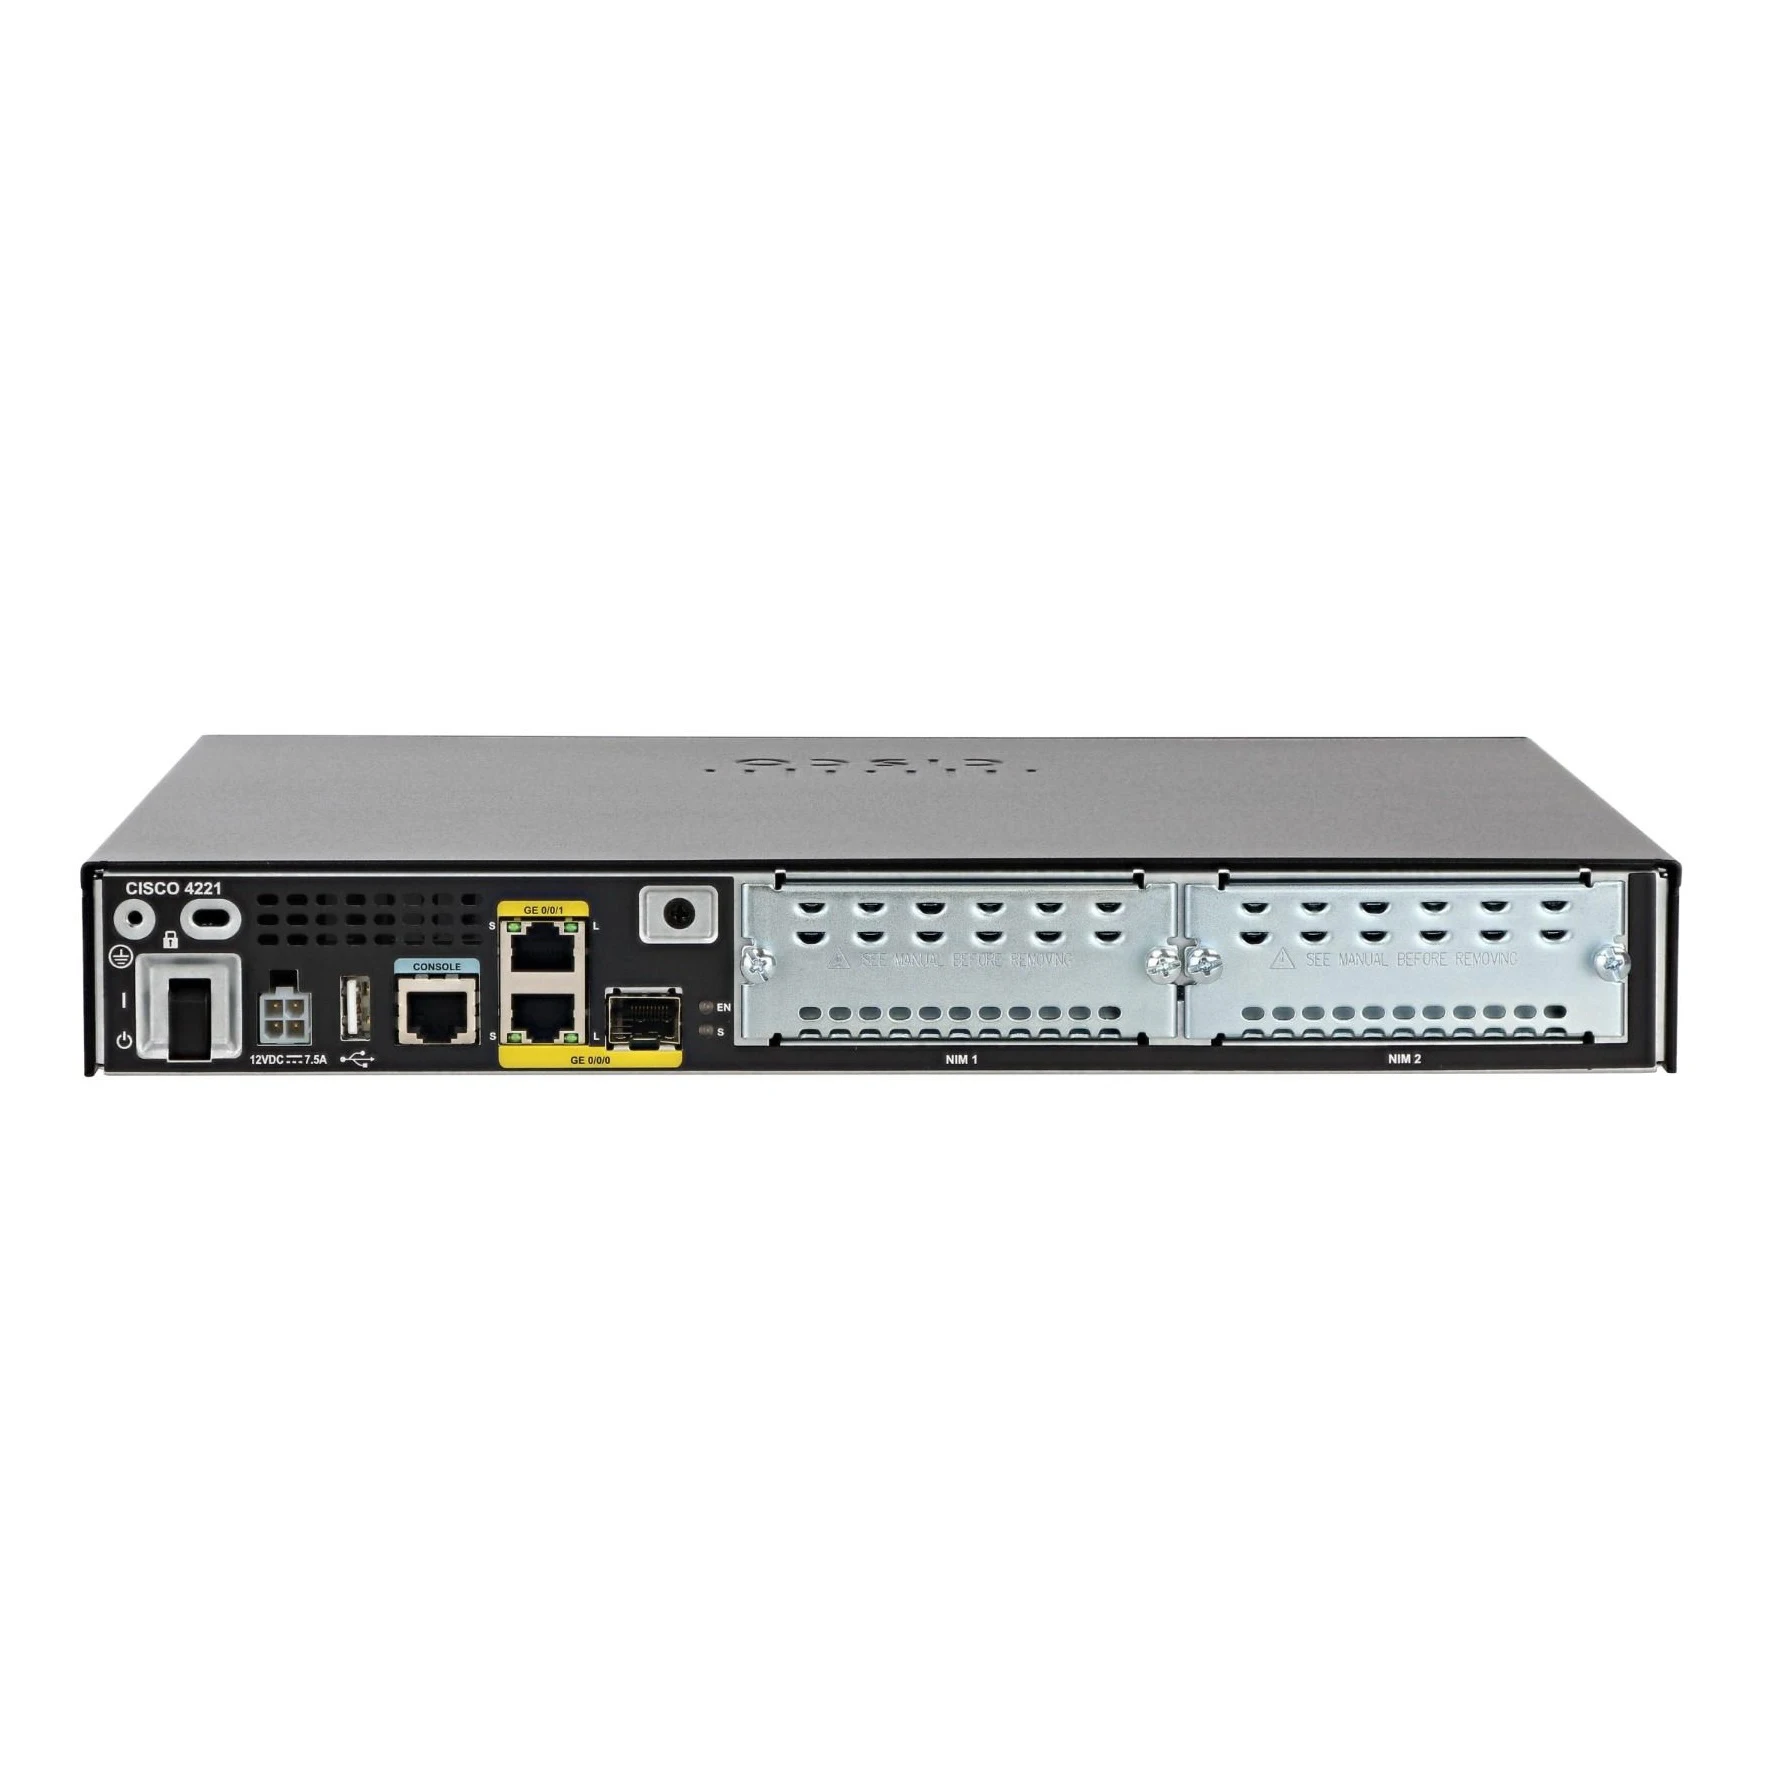 ik zal sterk zijn Ciro Afstoten 2022 Integrated Services Router Isr4221-sec-k9 - Buy Isr4331-sec/k9 Ge/sfp  Integrated Wan Ports,Isr 4431 1.2-gbps Performance,Isr 4461 75-mbps  Encrypted Throughput Product on Alibaba.com